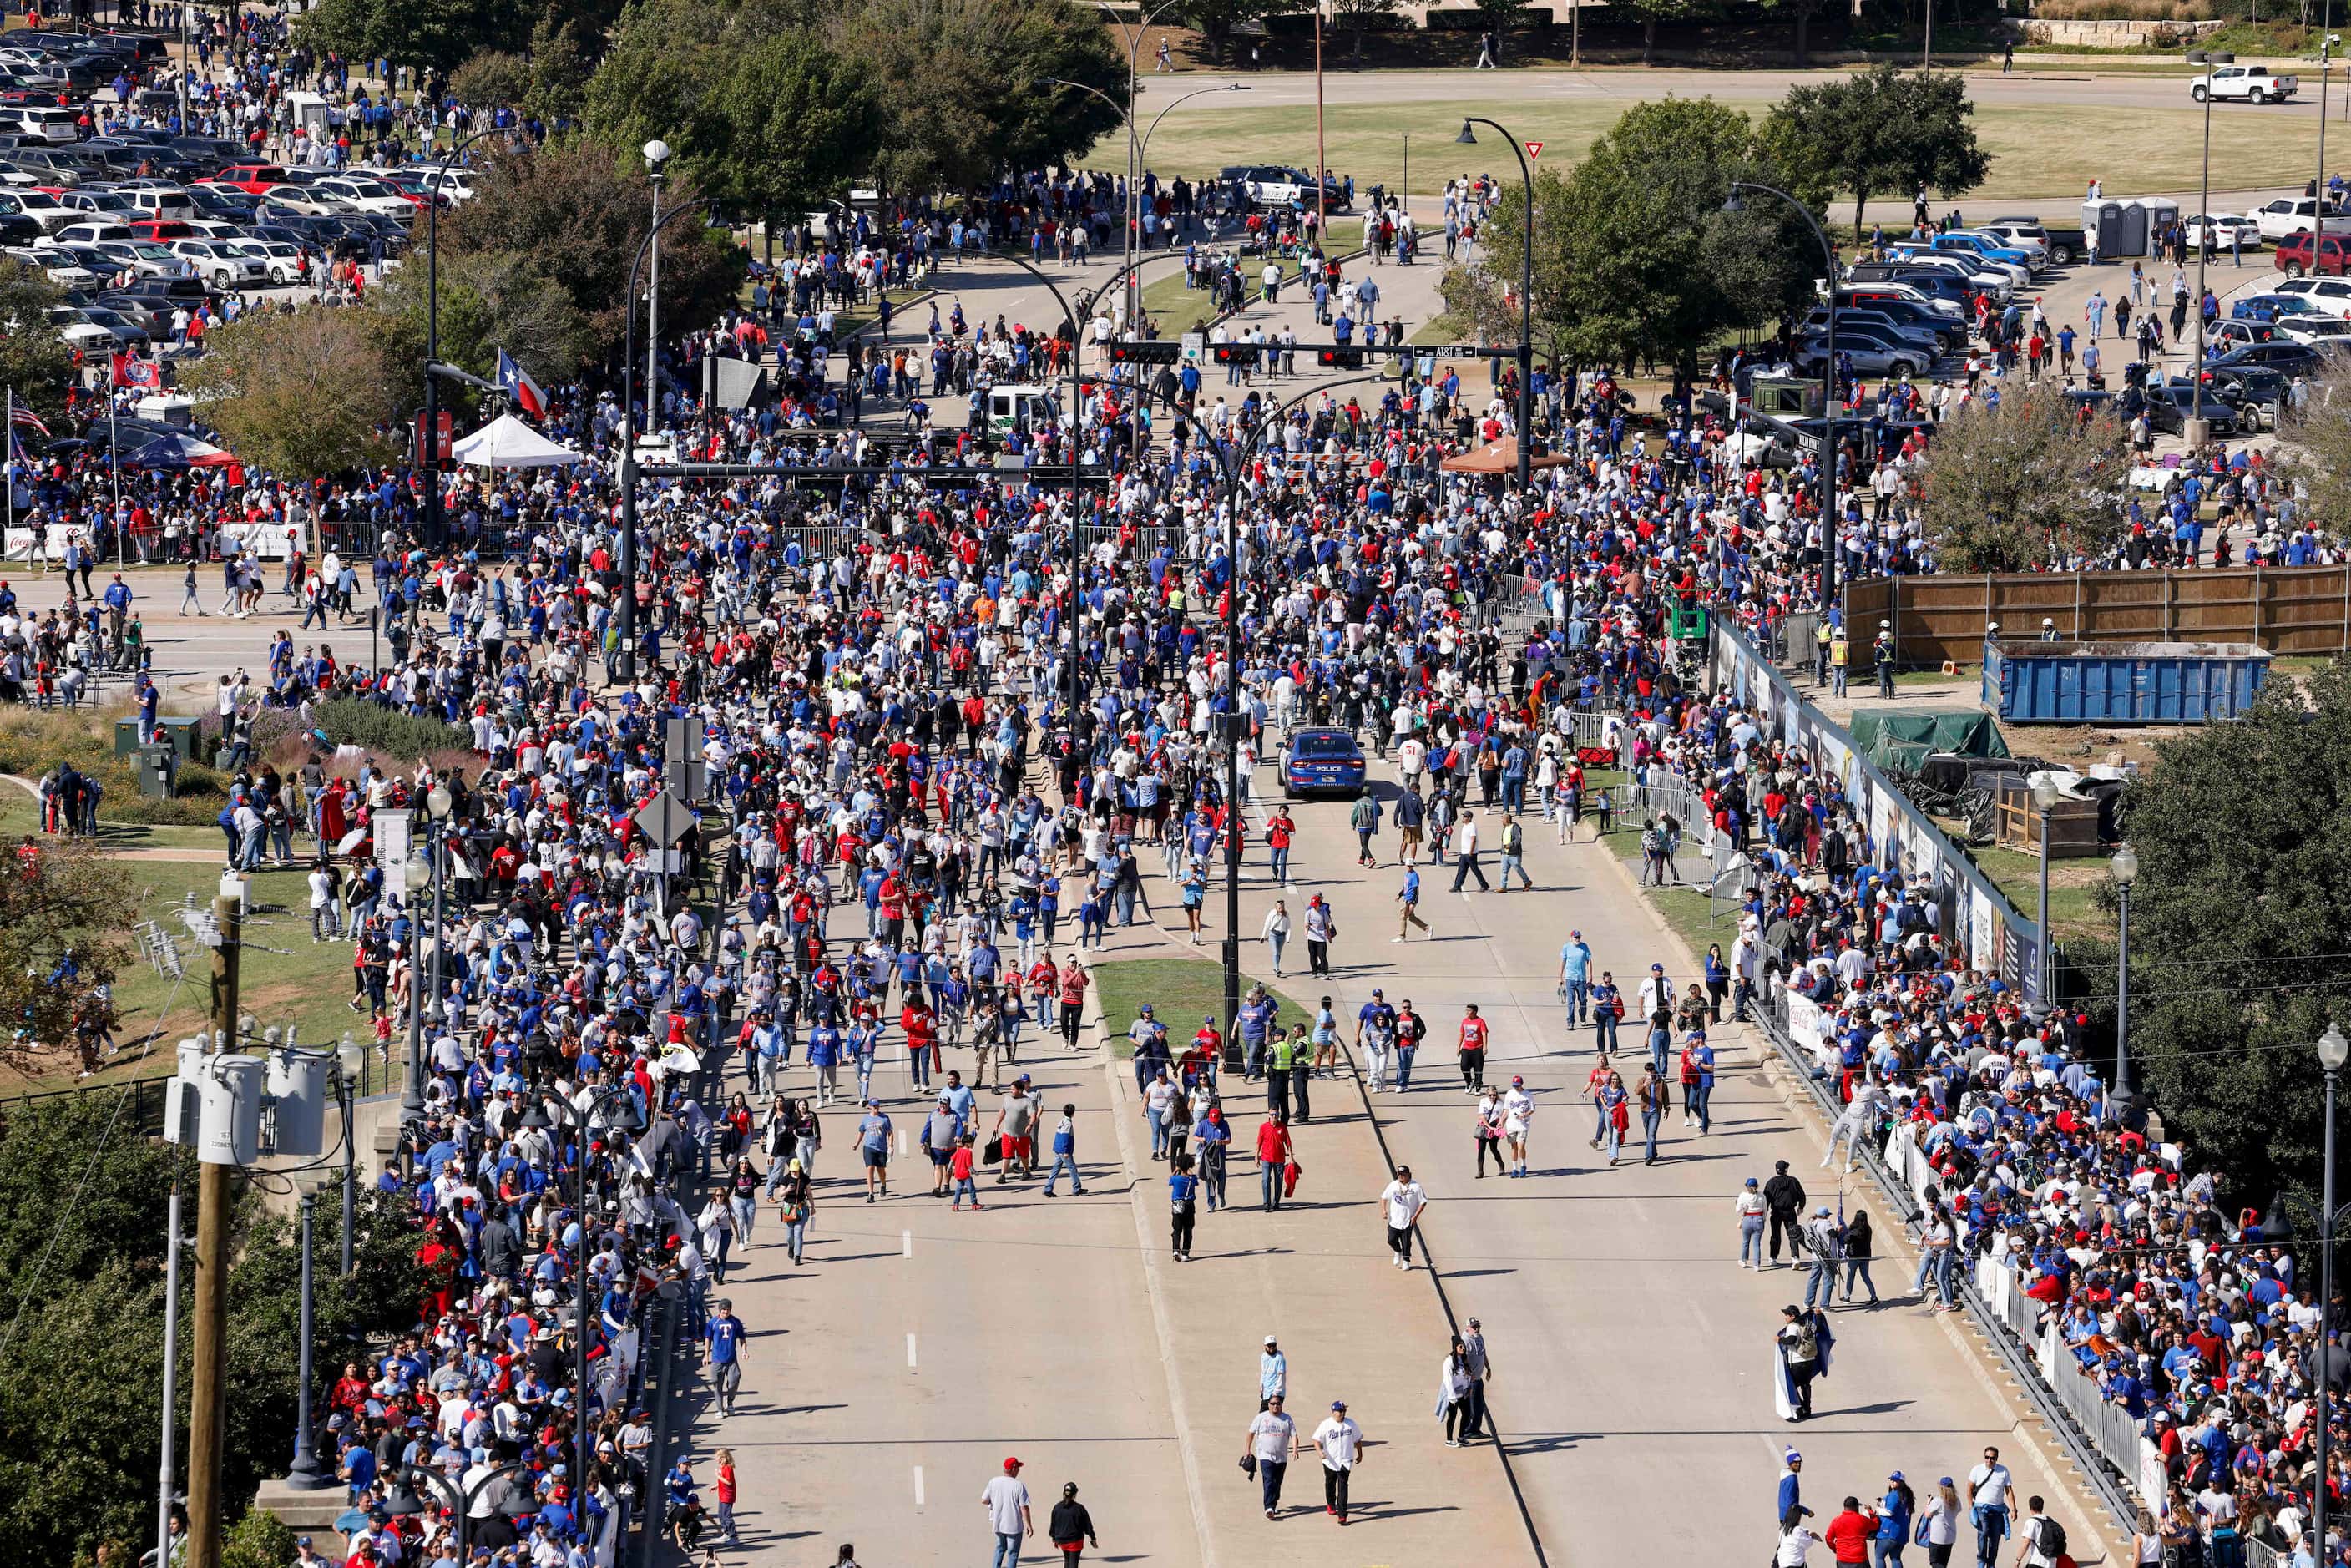 Fans fill the street as they head to the ceremony after the Texas Rangers World Series...